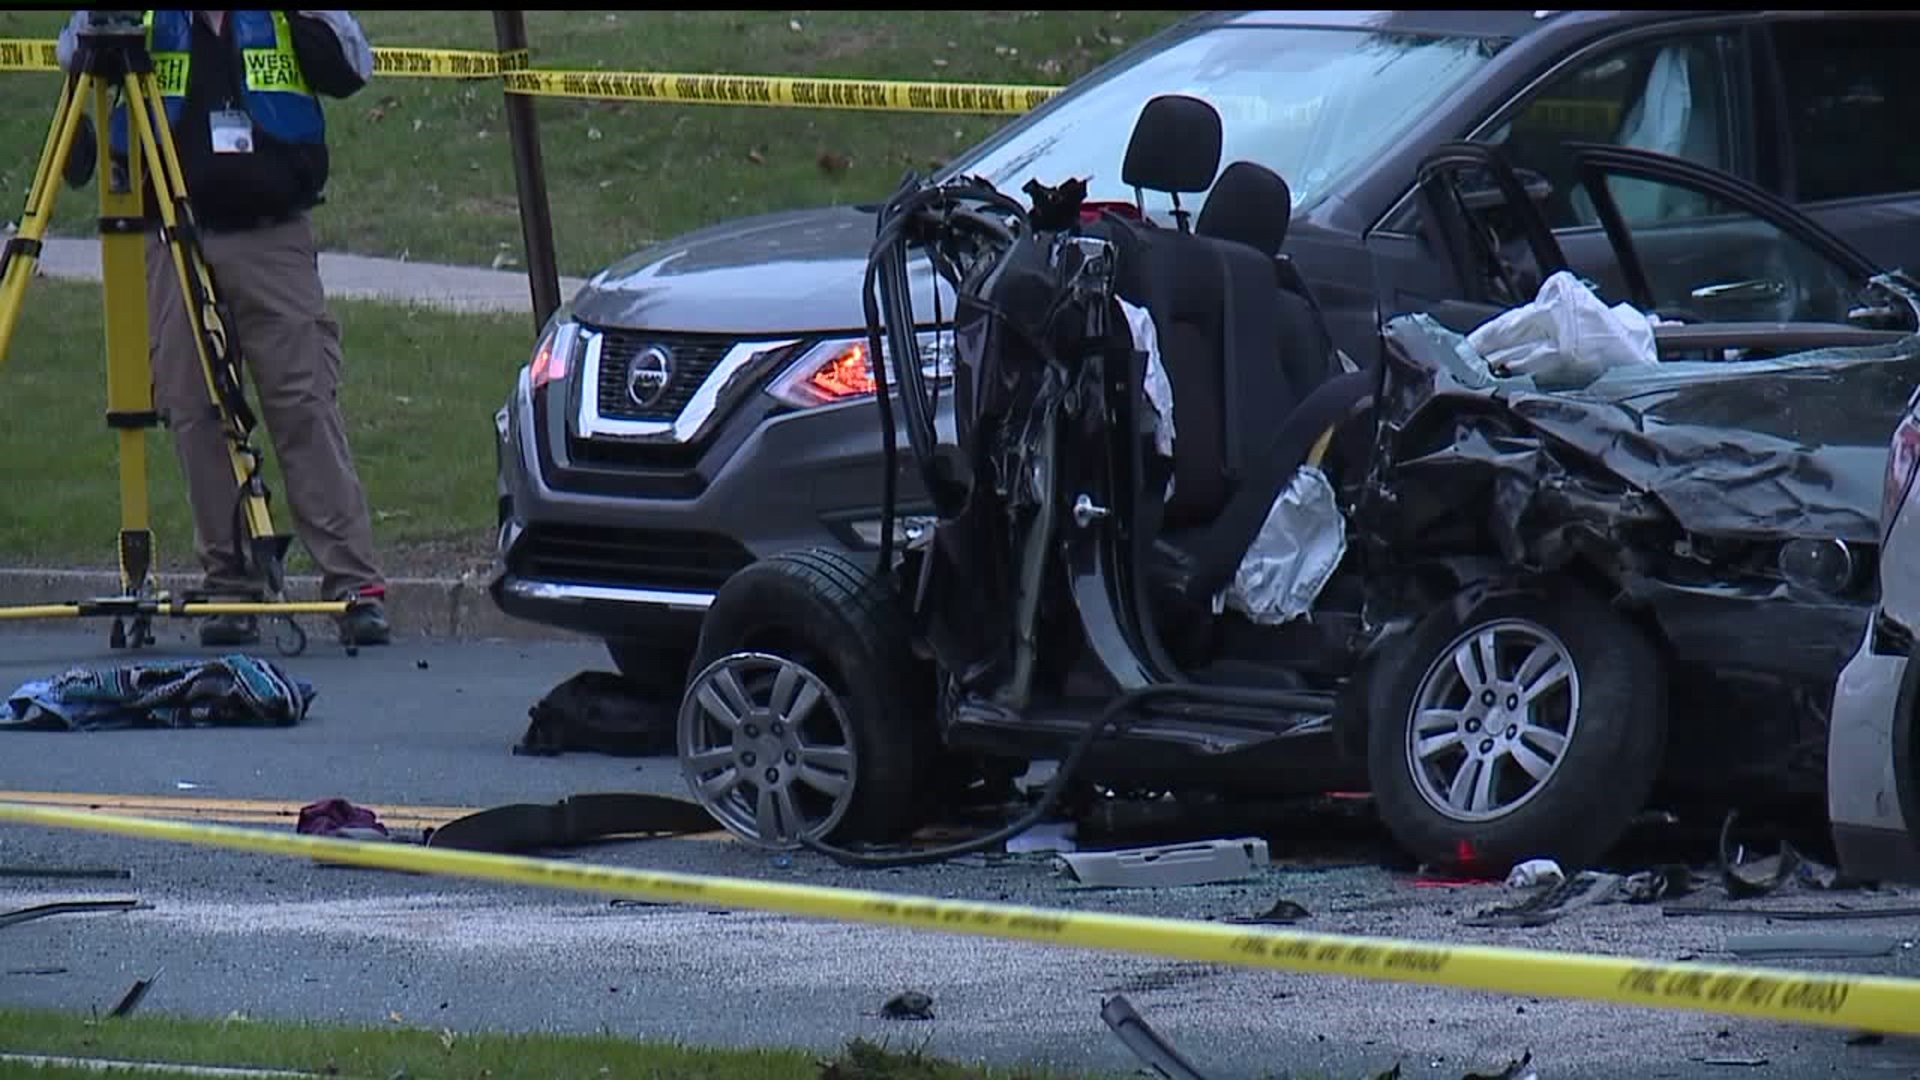 Counseling Offered to Students After Deadly Crash